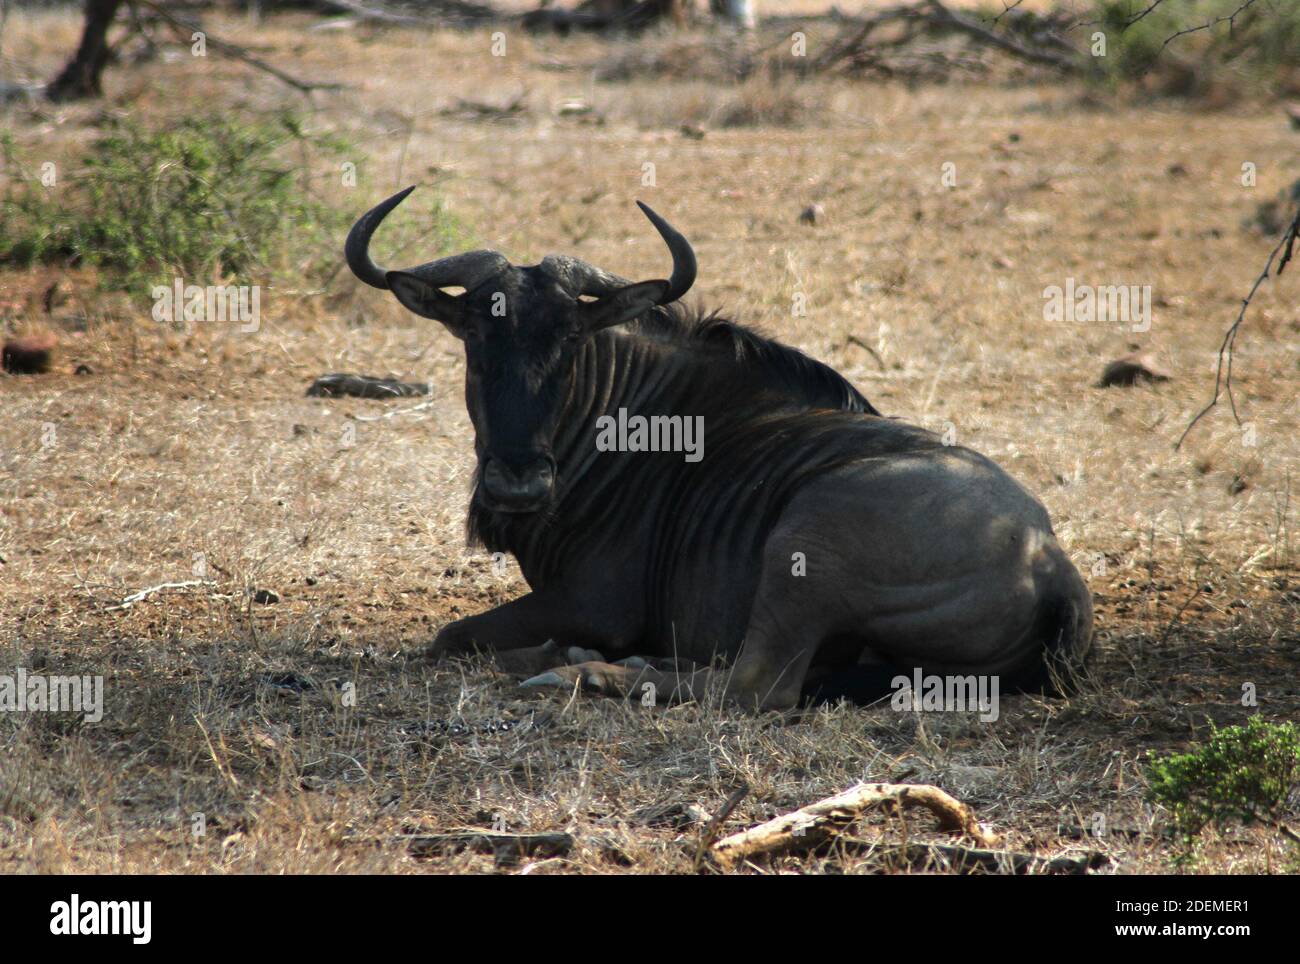 Blue wildebeest (Connochaetes taurinus), Kruger National Park, South Africa Stock Photo